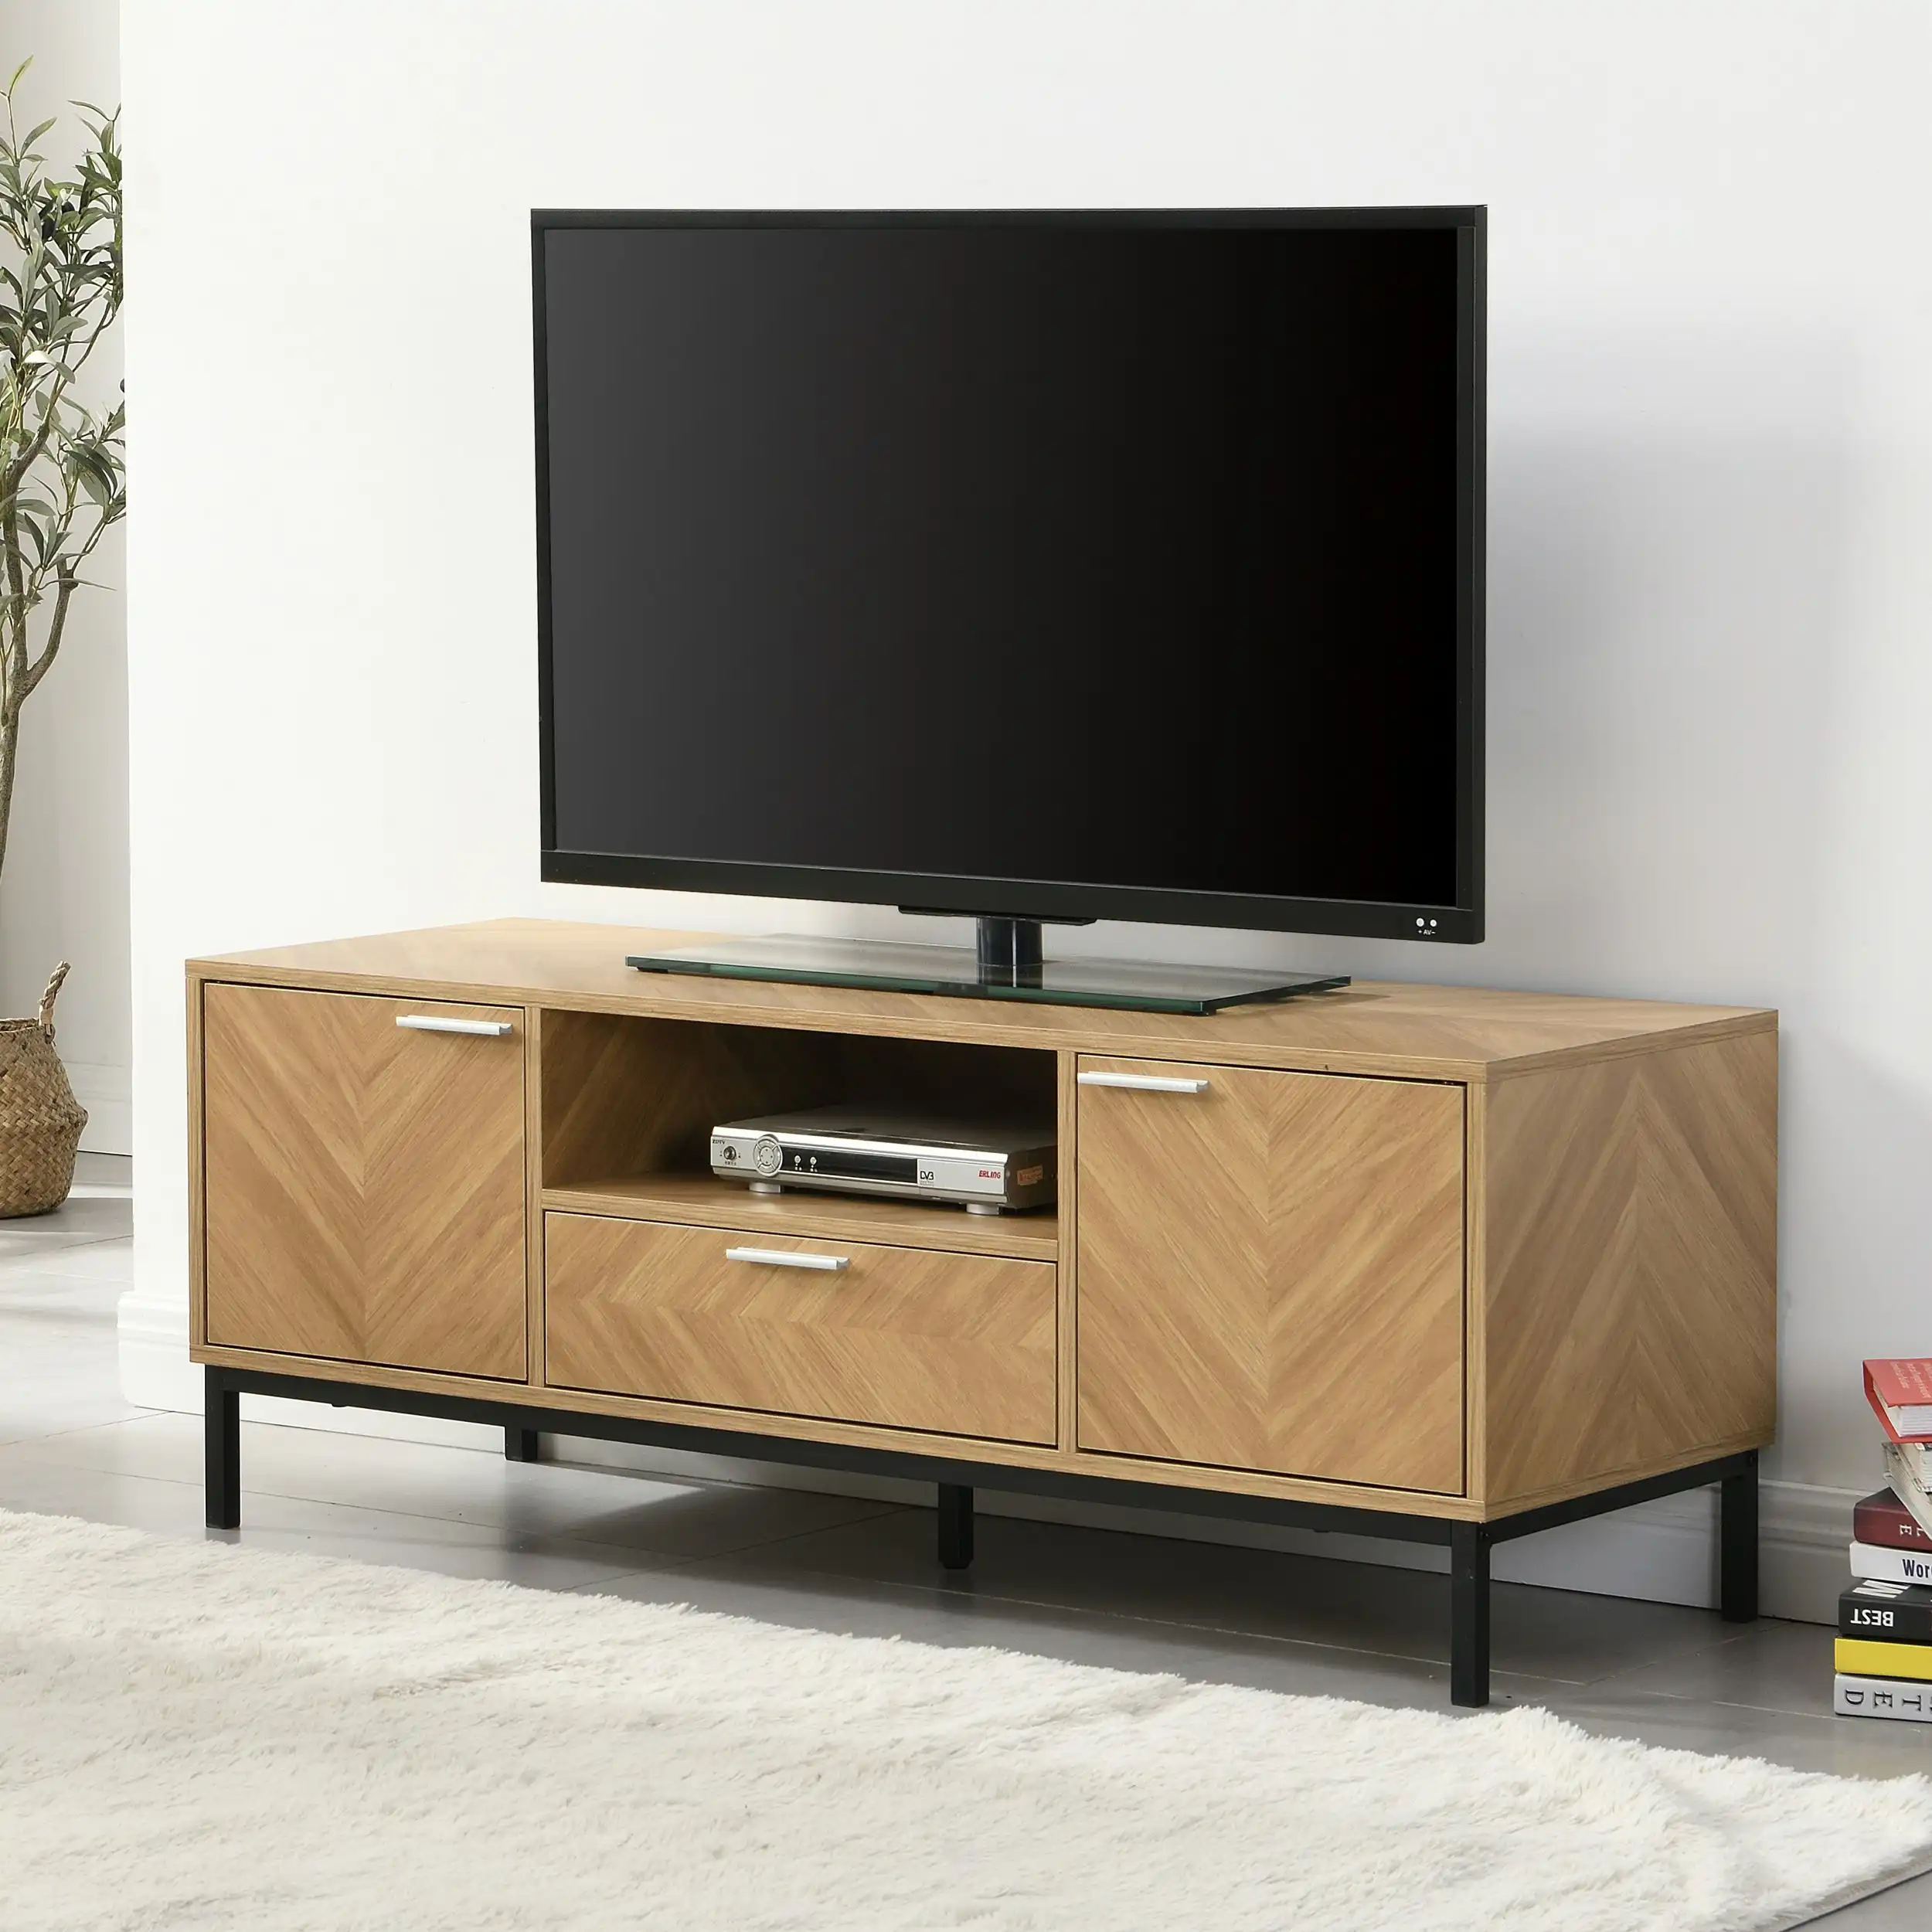 IHOMDEC Entertainment Unit TV Cabinet TV Stand Storage with Open Shelf and Two Cabinets Oak